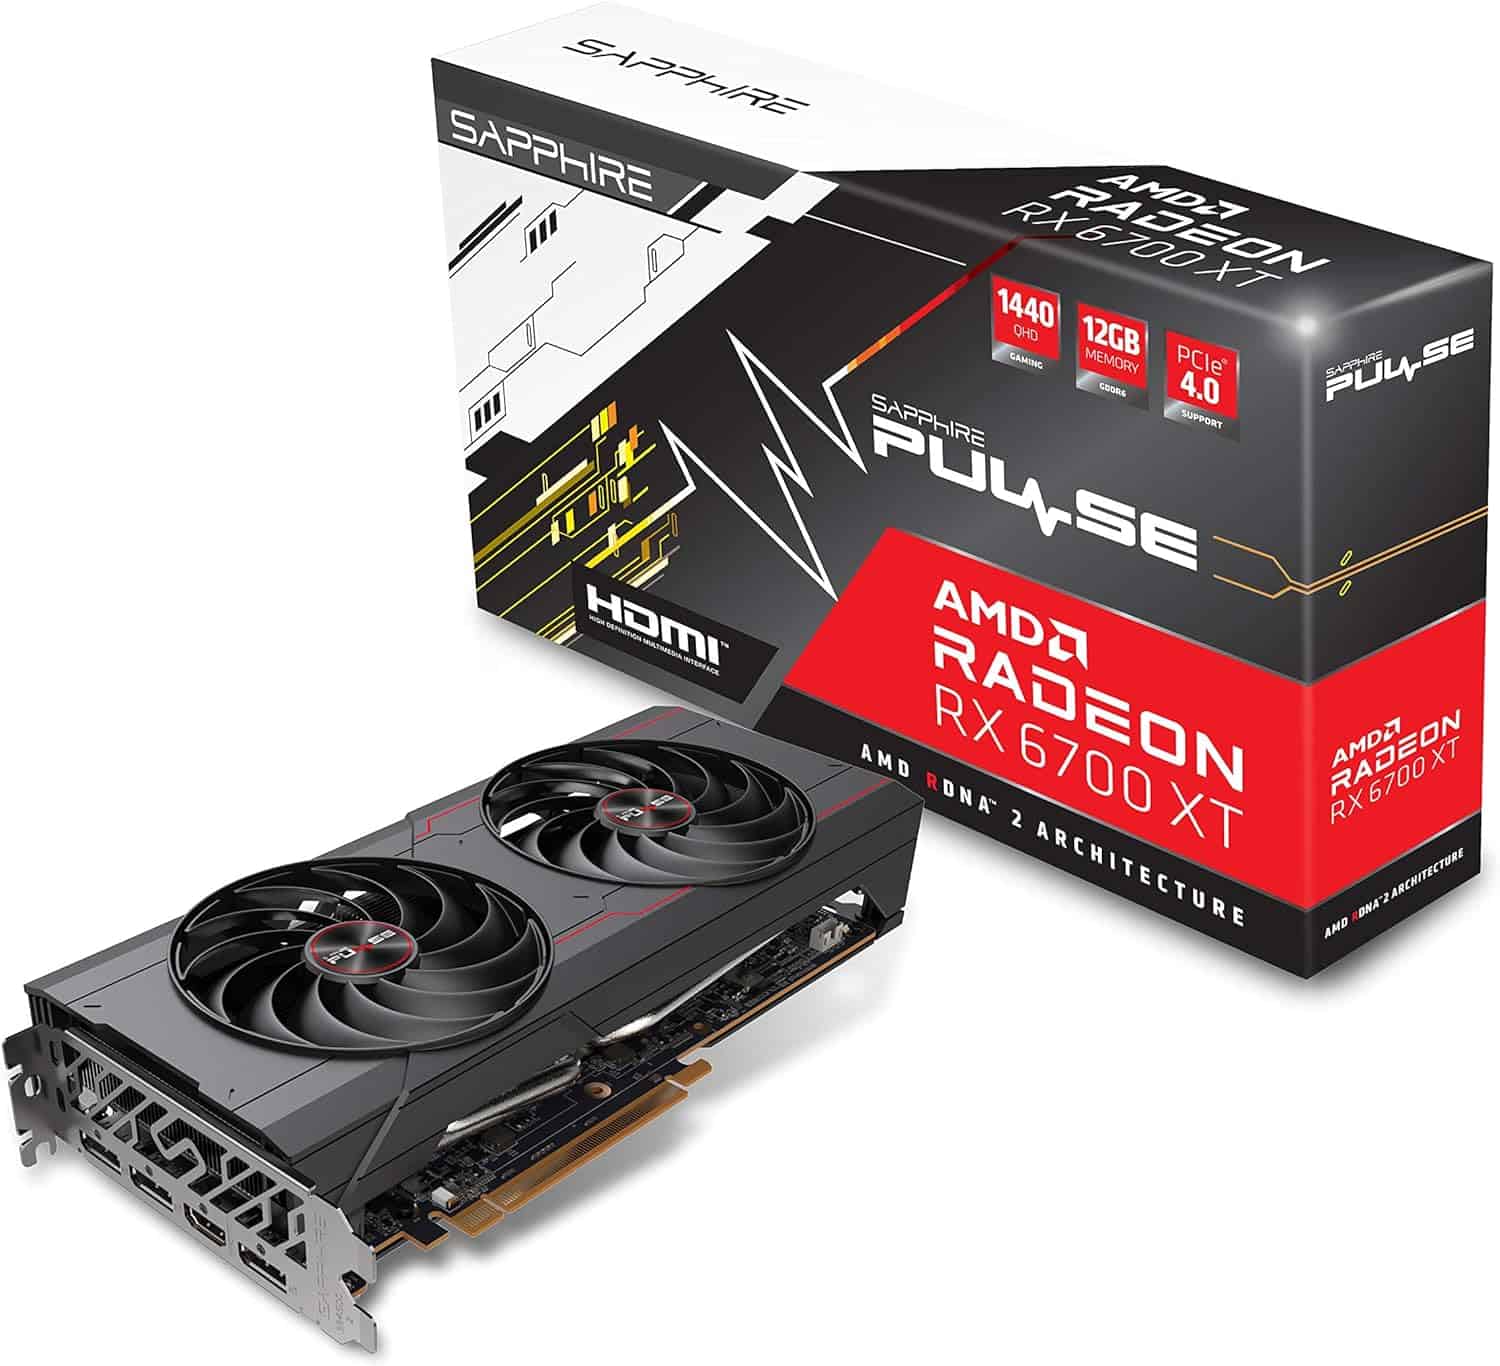 Sapphire Pulse Radeon RX 6700 XT graphics card alongside its packaging box, featuring dual fans and multiple output ports.